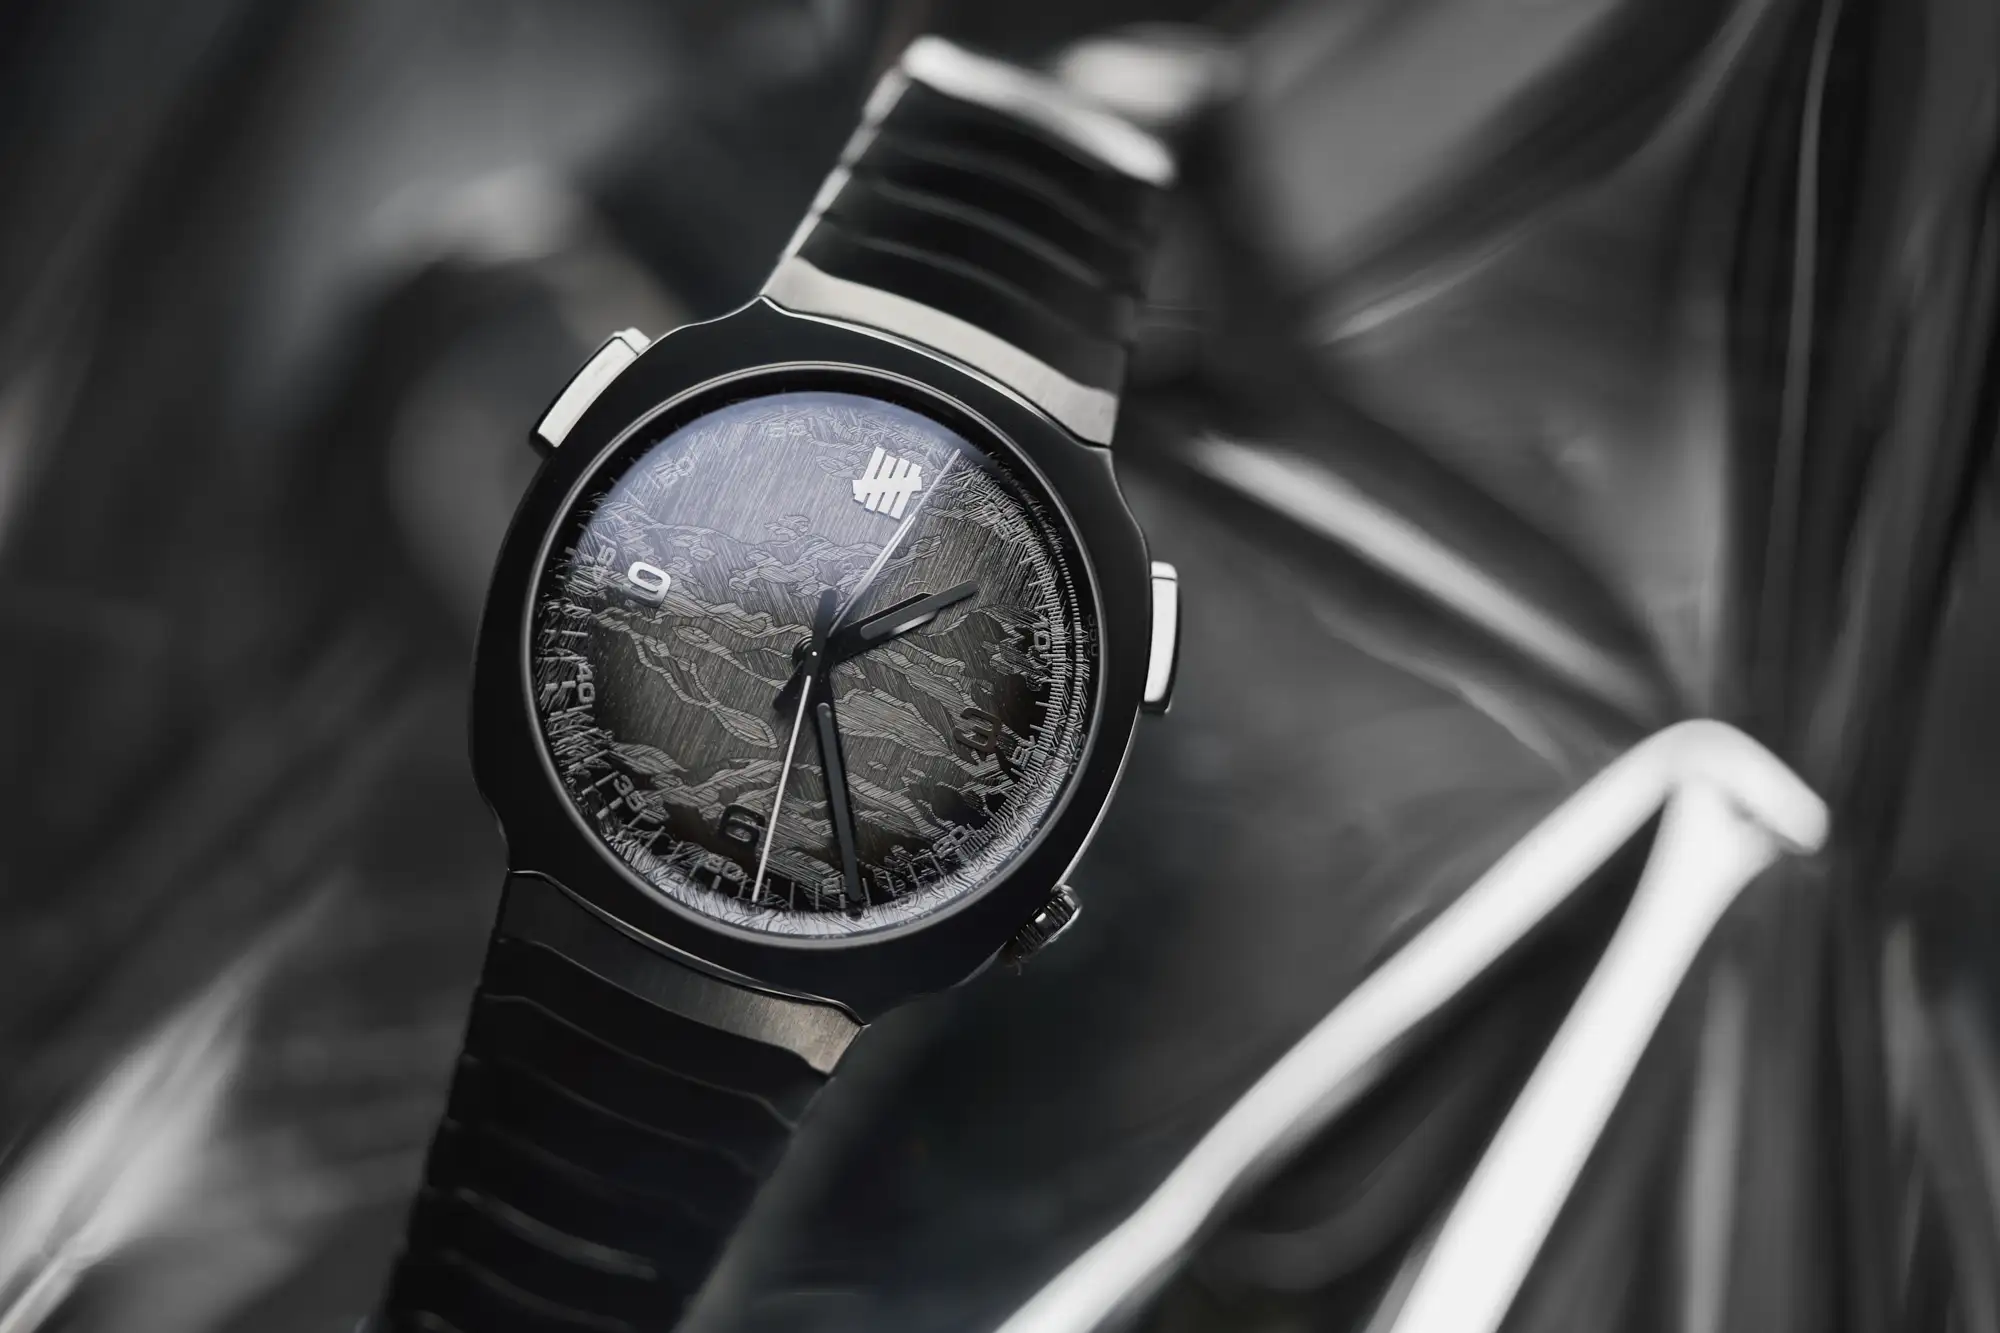 [VIDEO] The Oris We’ve Been Waiting For & One Hype H. Moser in this week’s On-Wrist Reaction